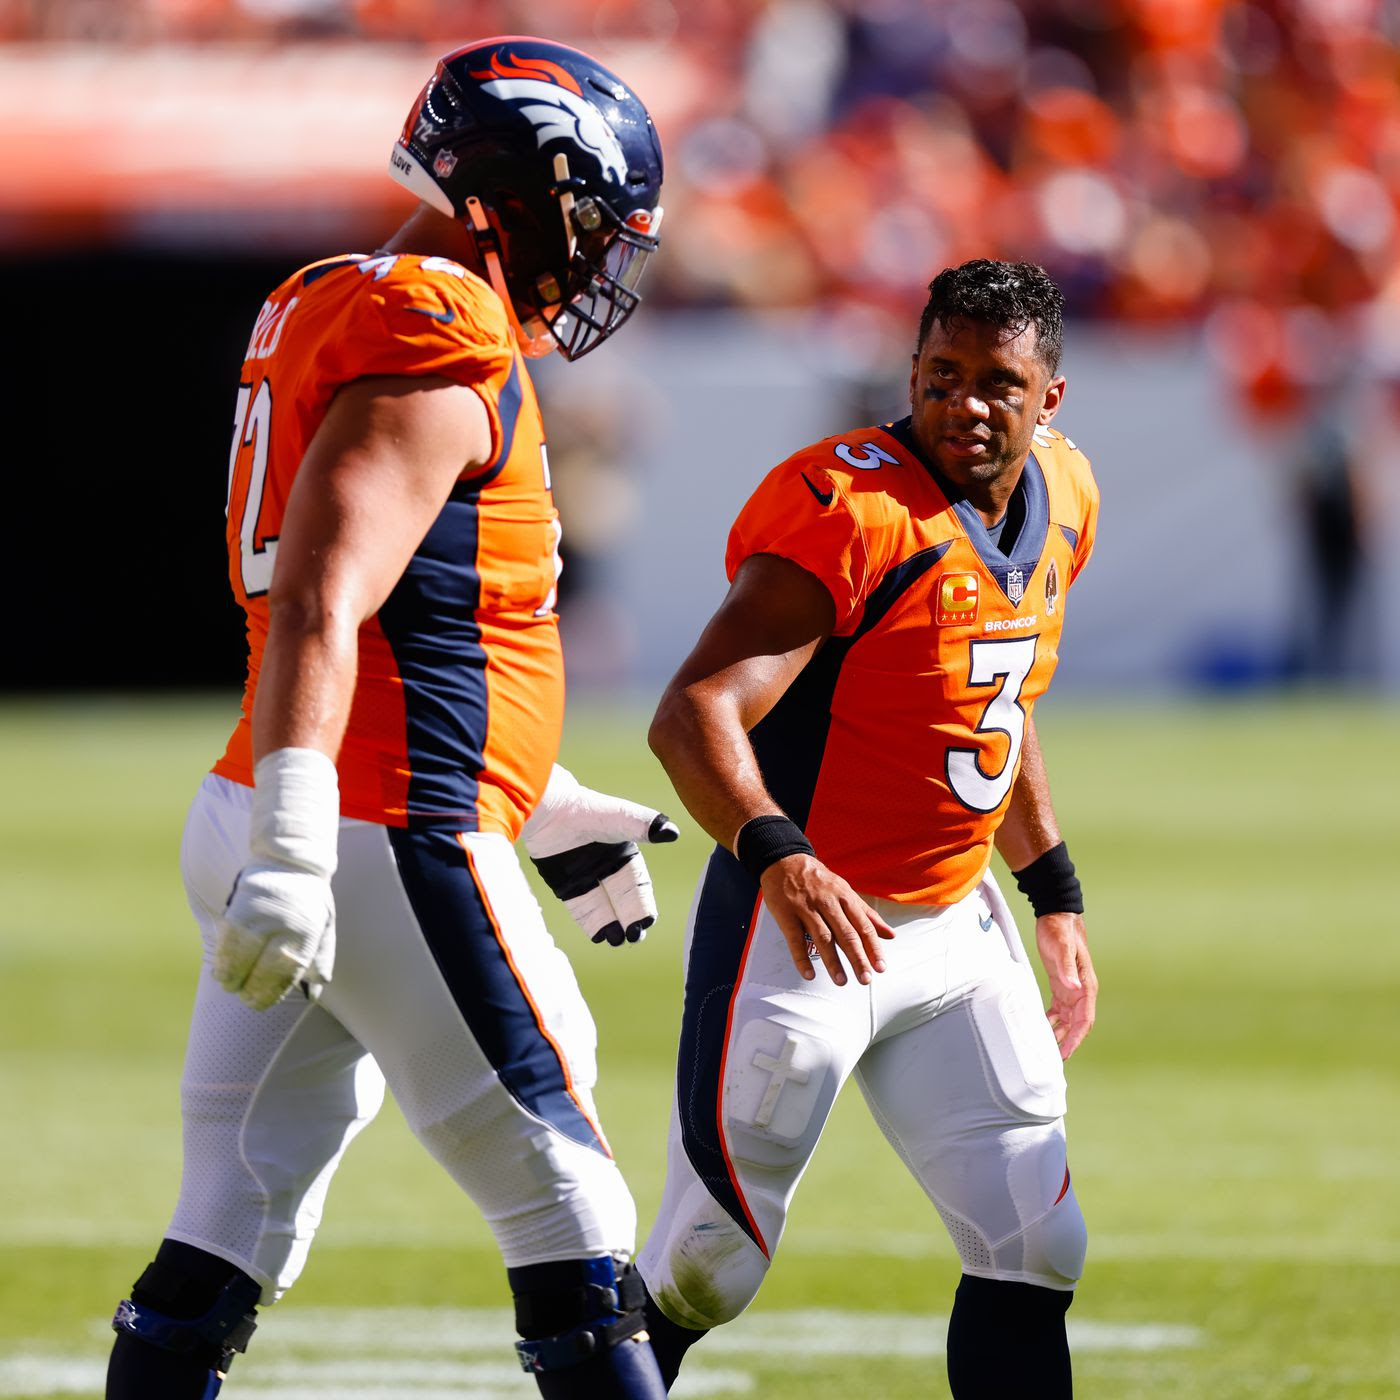 Niners vs Broncos week 3: How does Denver feel about Russell Wilson so far?